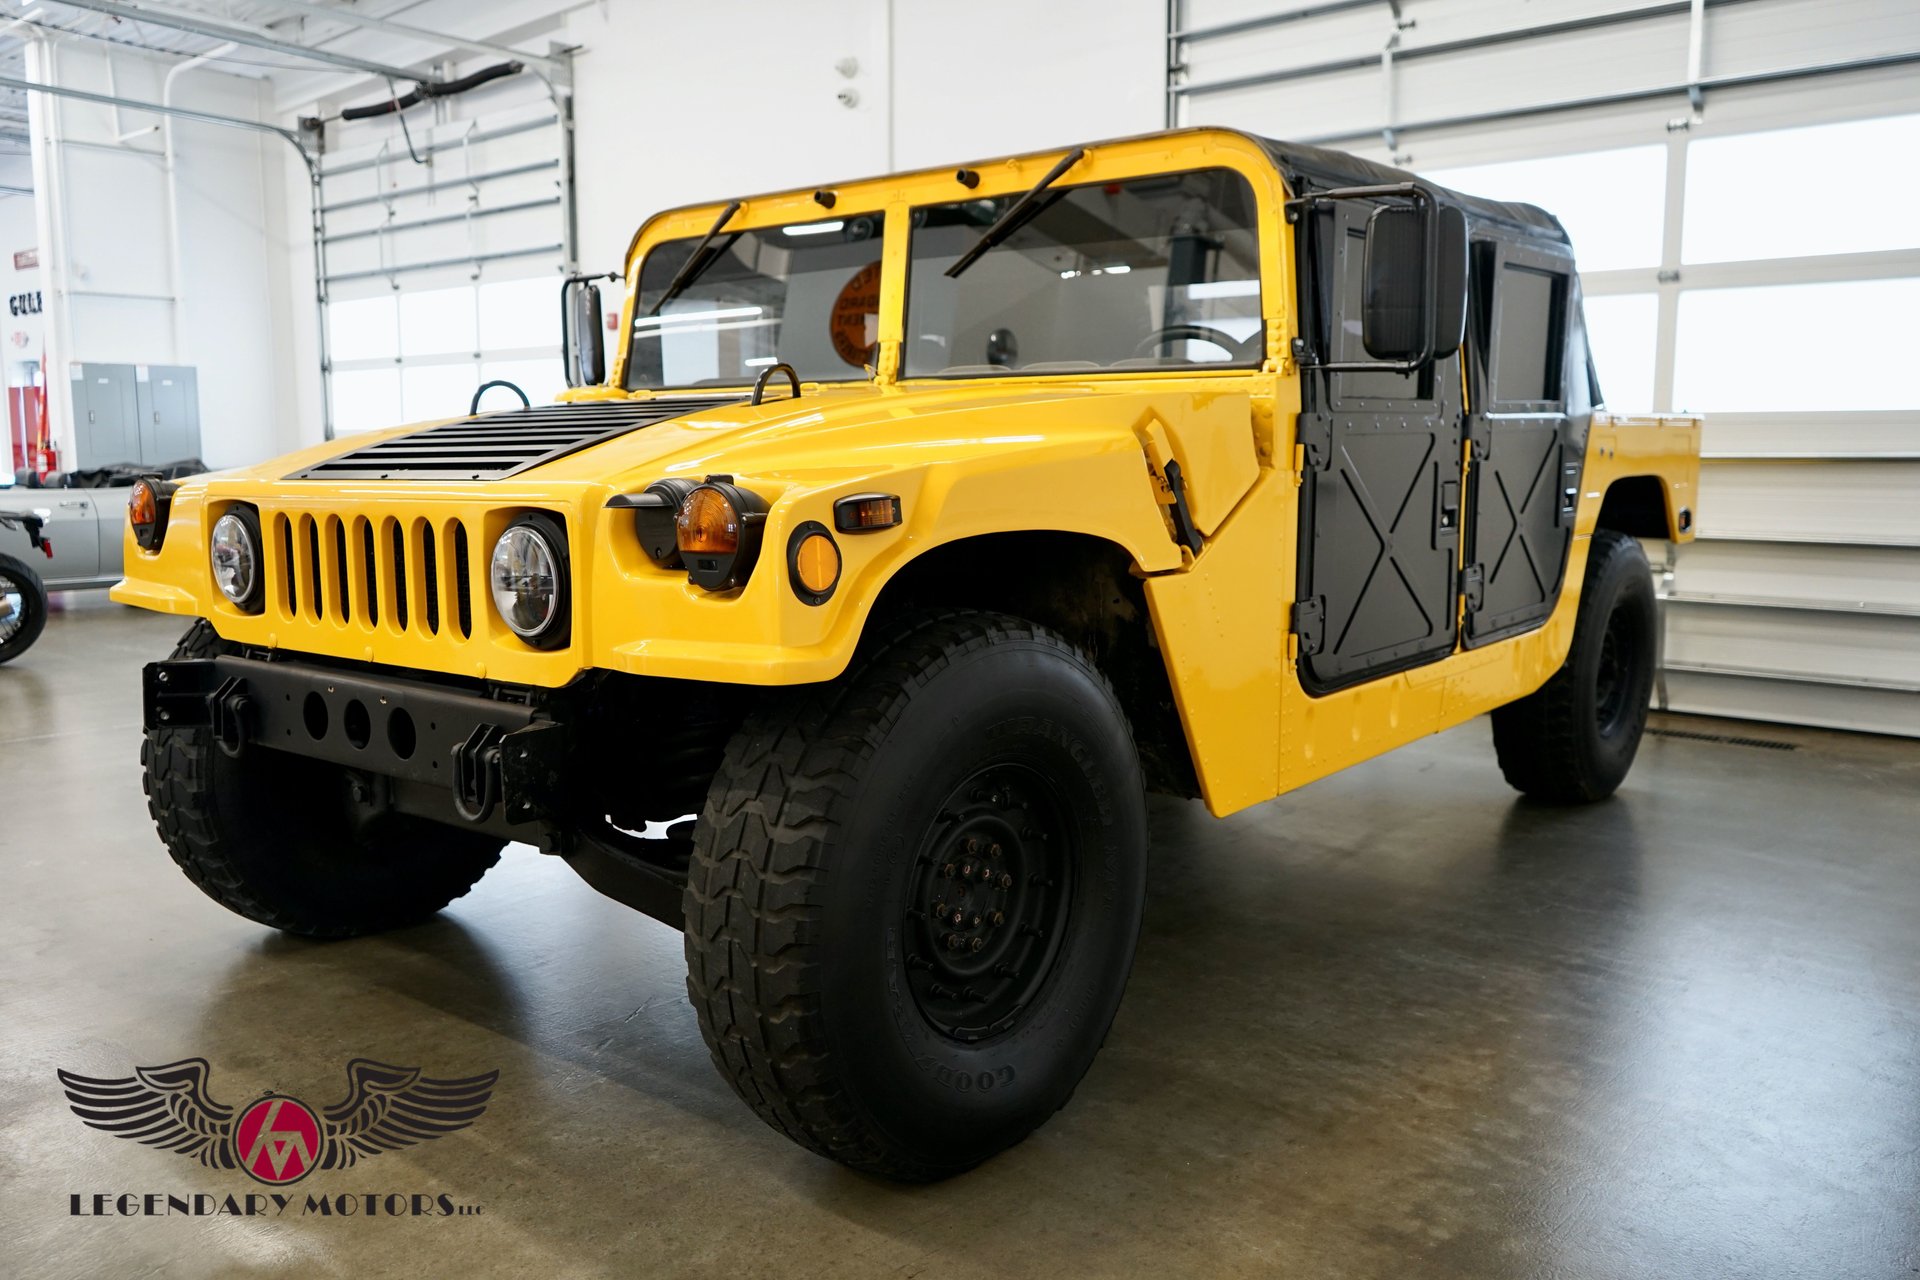 1986 AM General Humvee | Legendary Motors - Classic Cars, Muscle Cars, Hot  Rods & Antique Cars - Rowley, MA